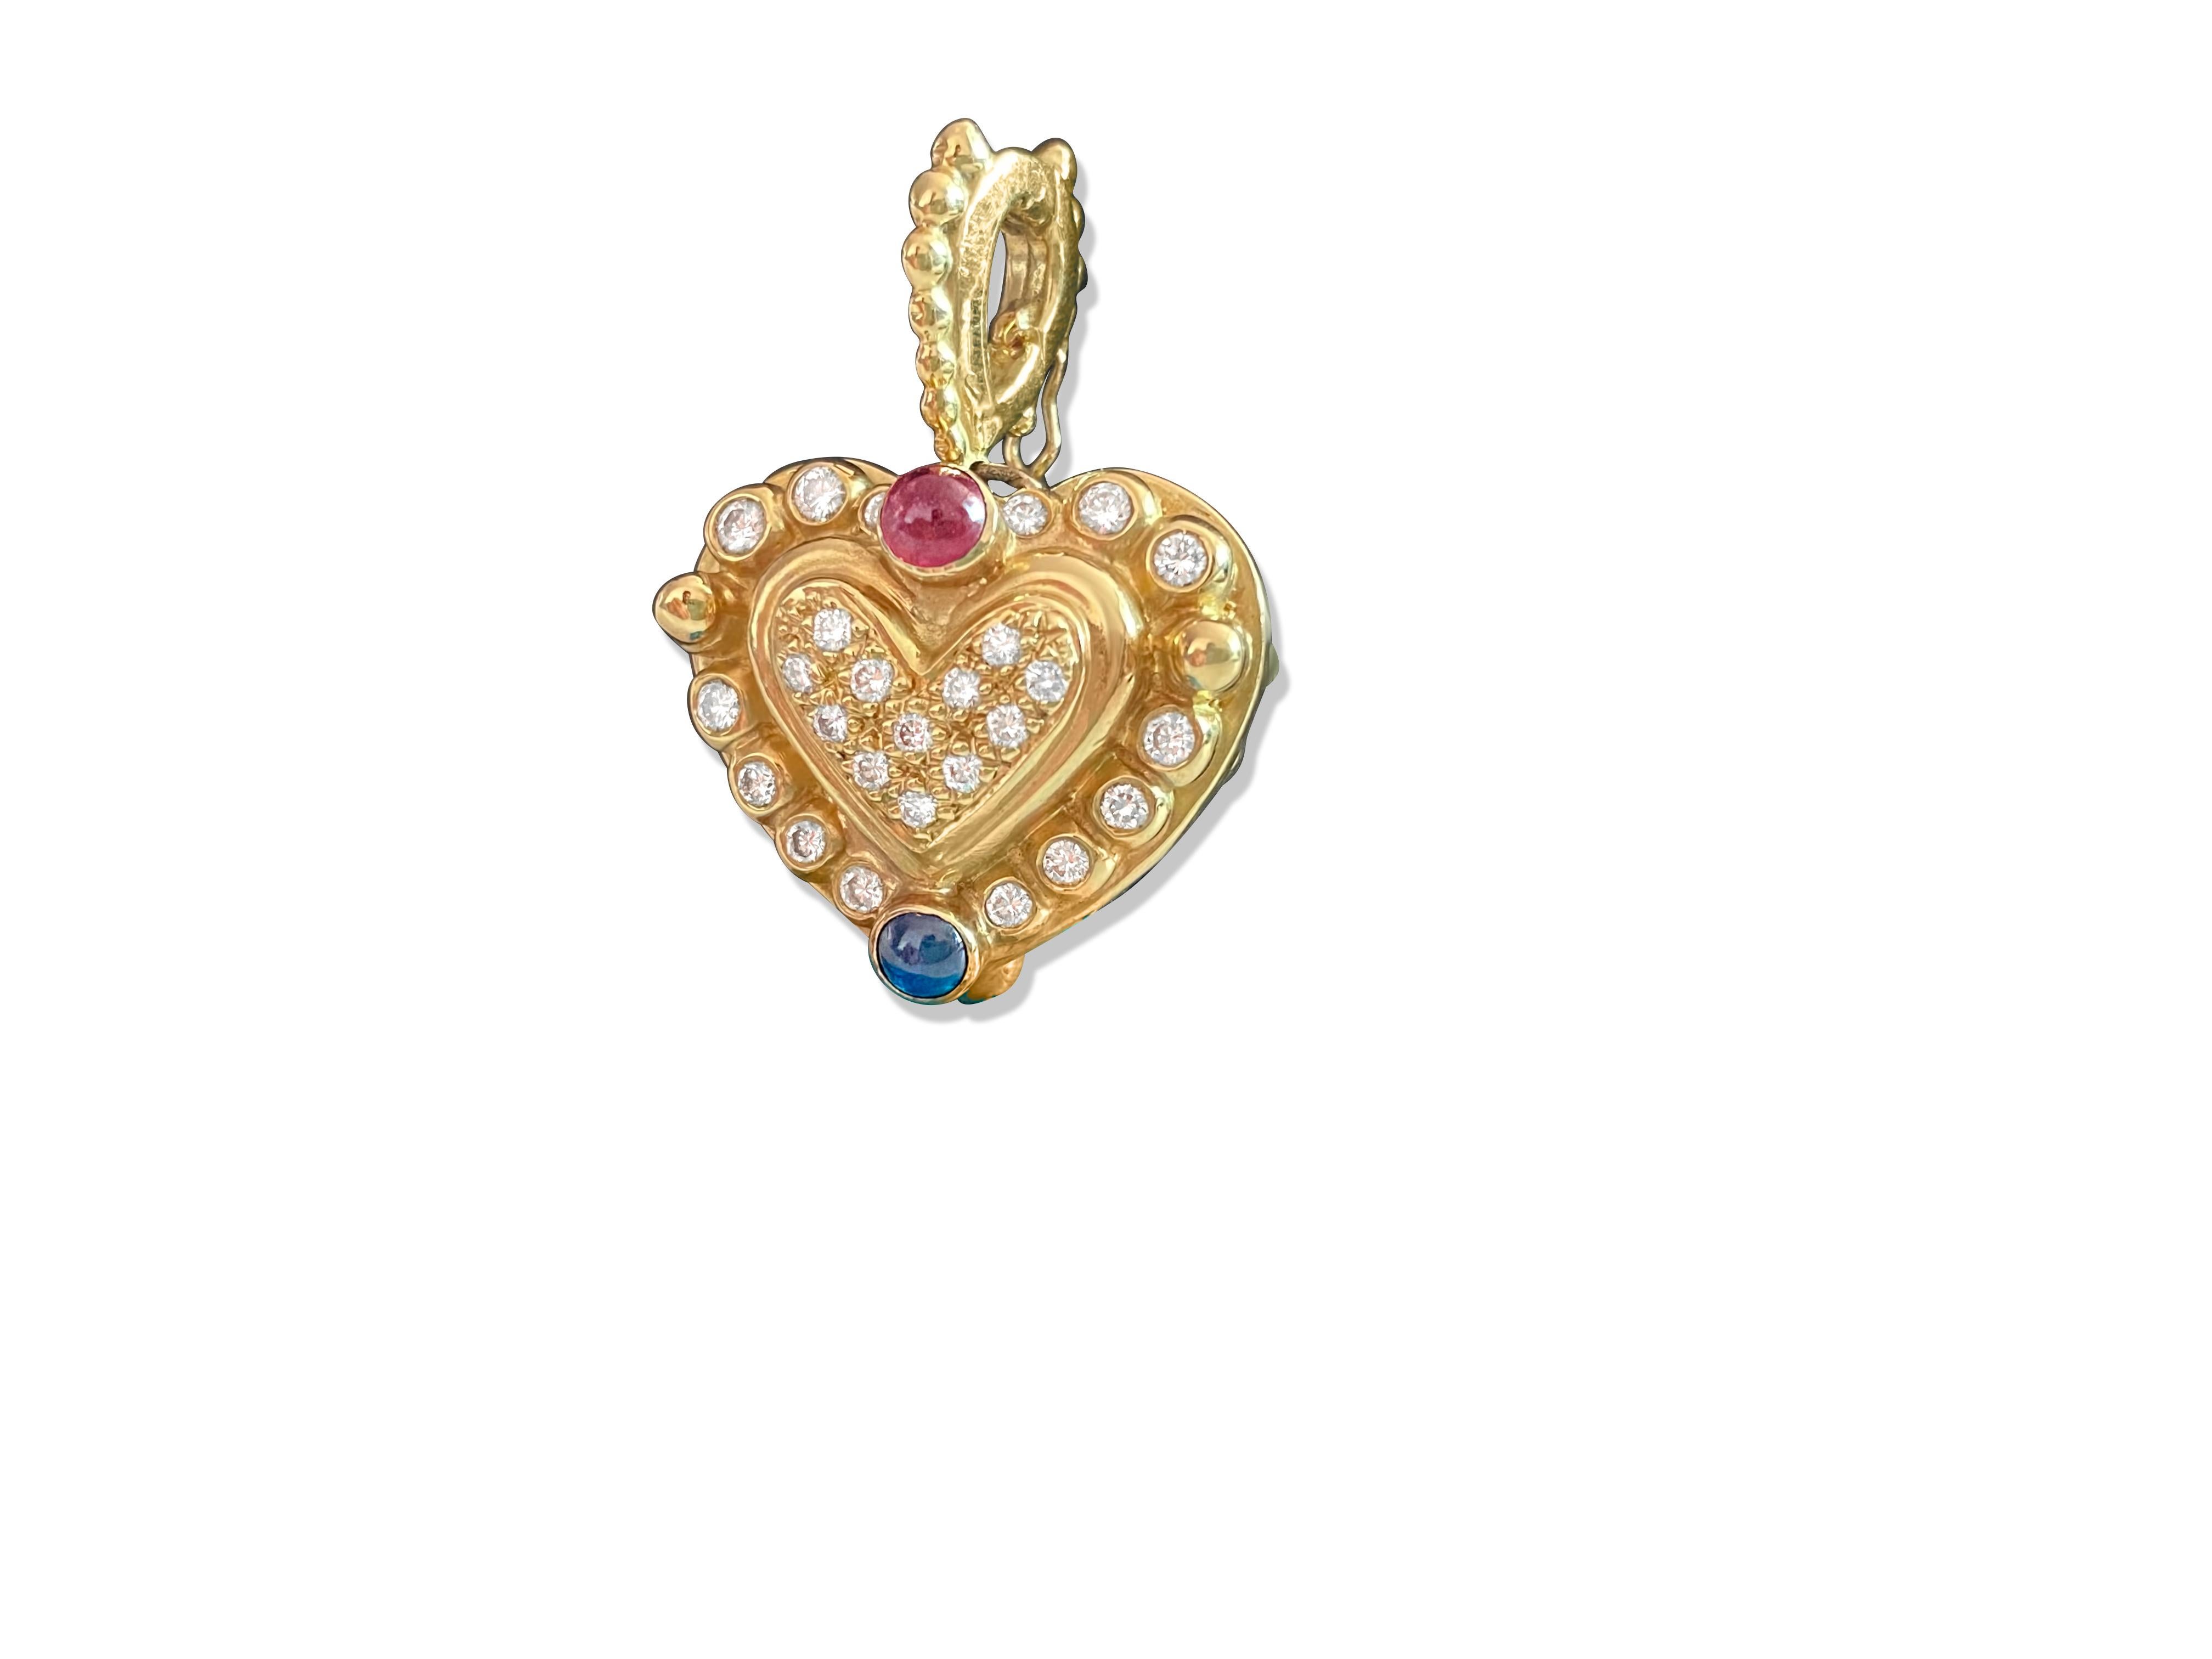 Women's or Men's Vintage Natural 1.25 Carat Diamond, Ruby and Sapphire Heart Pendant for Her For Sale